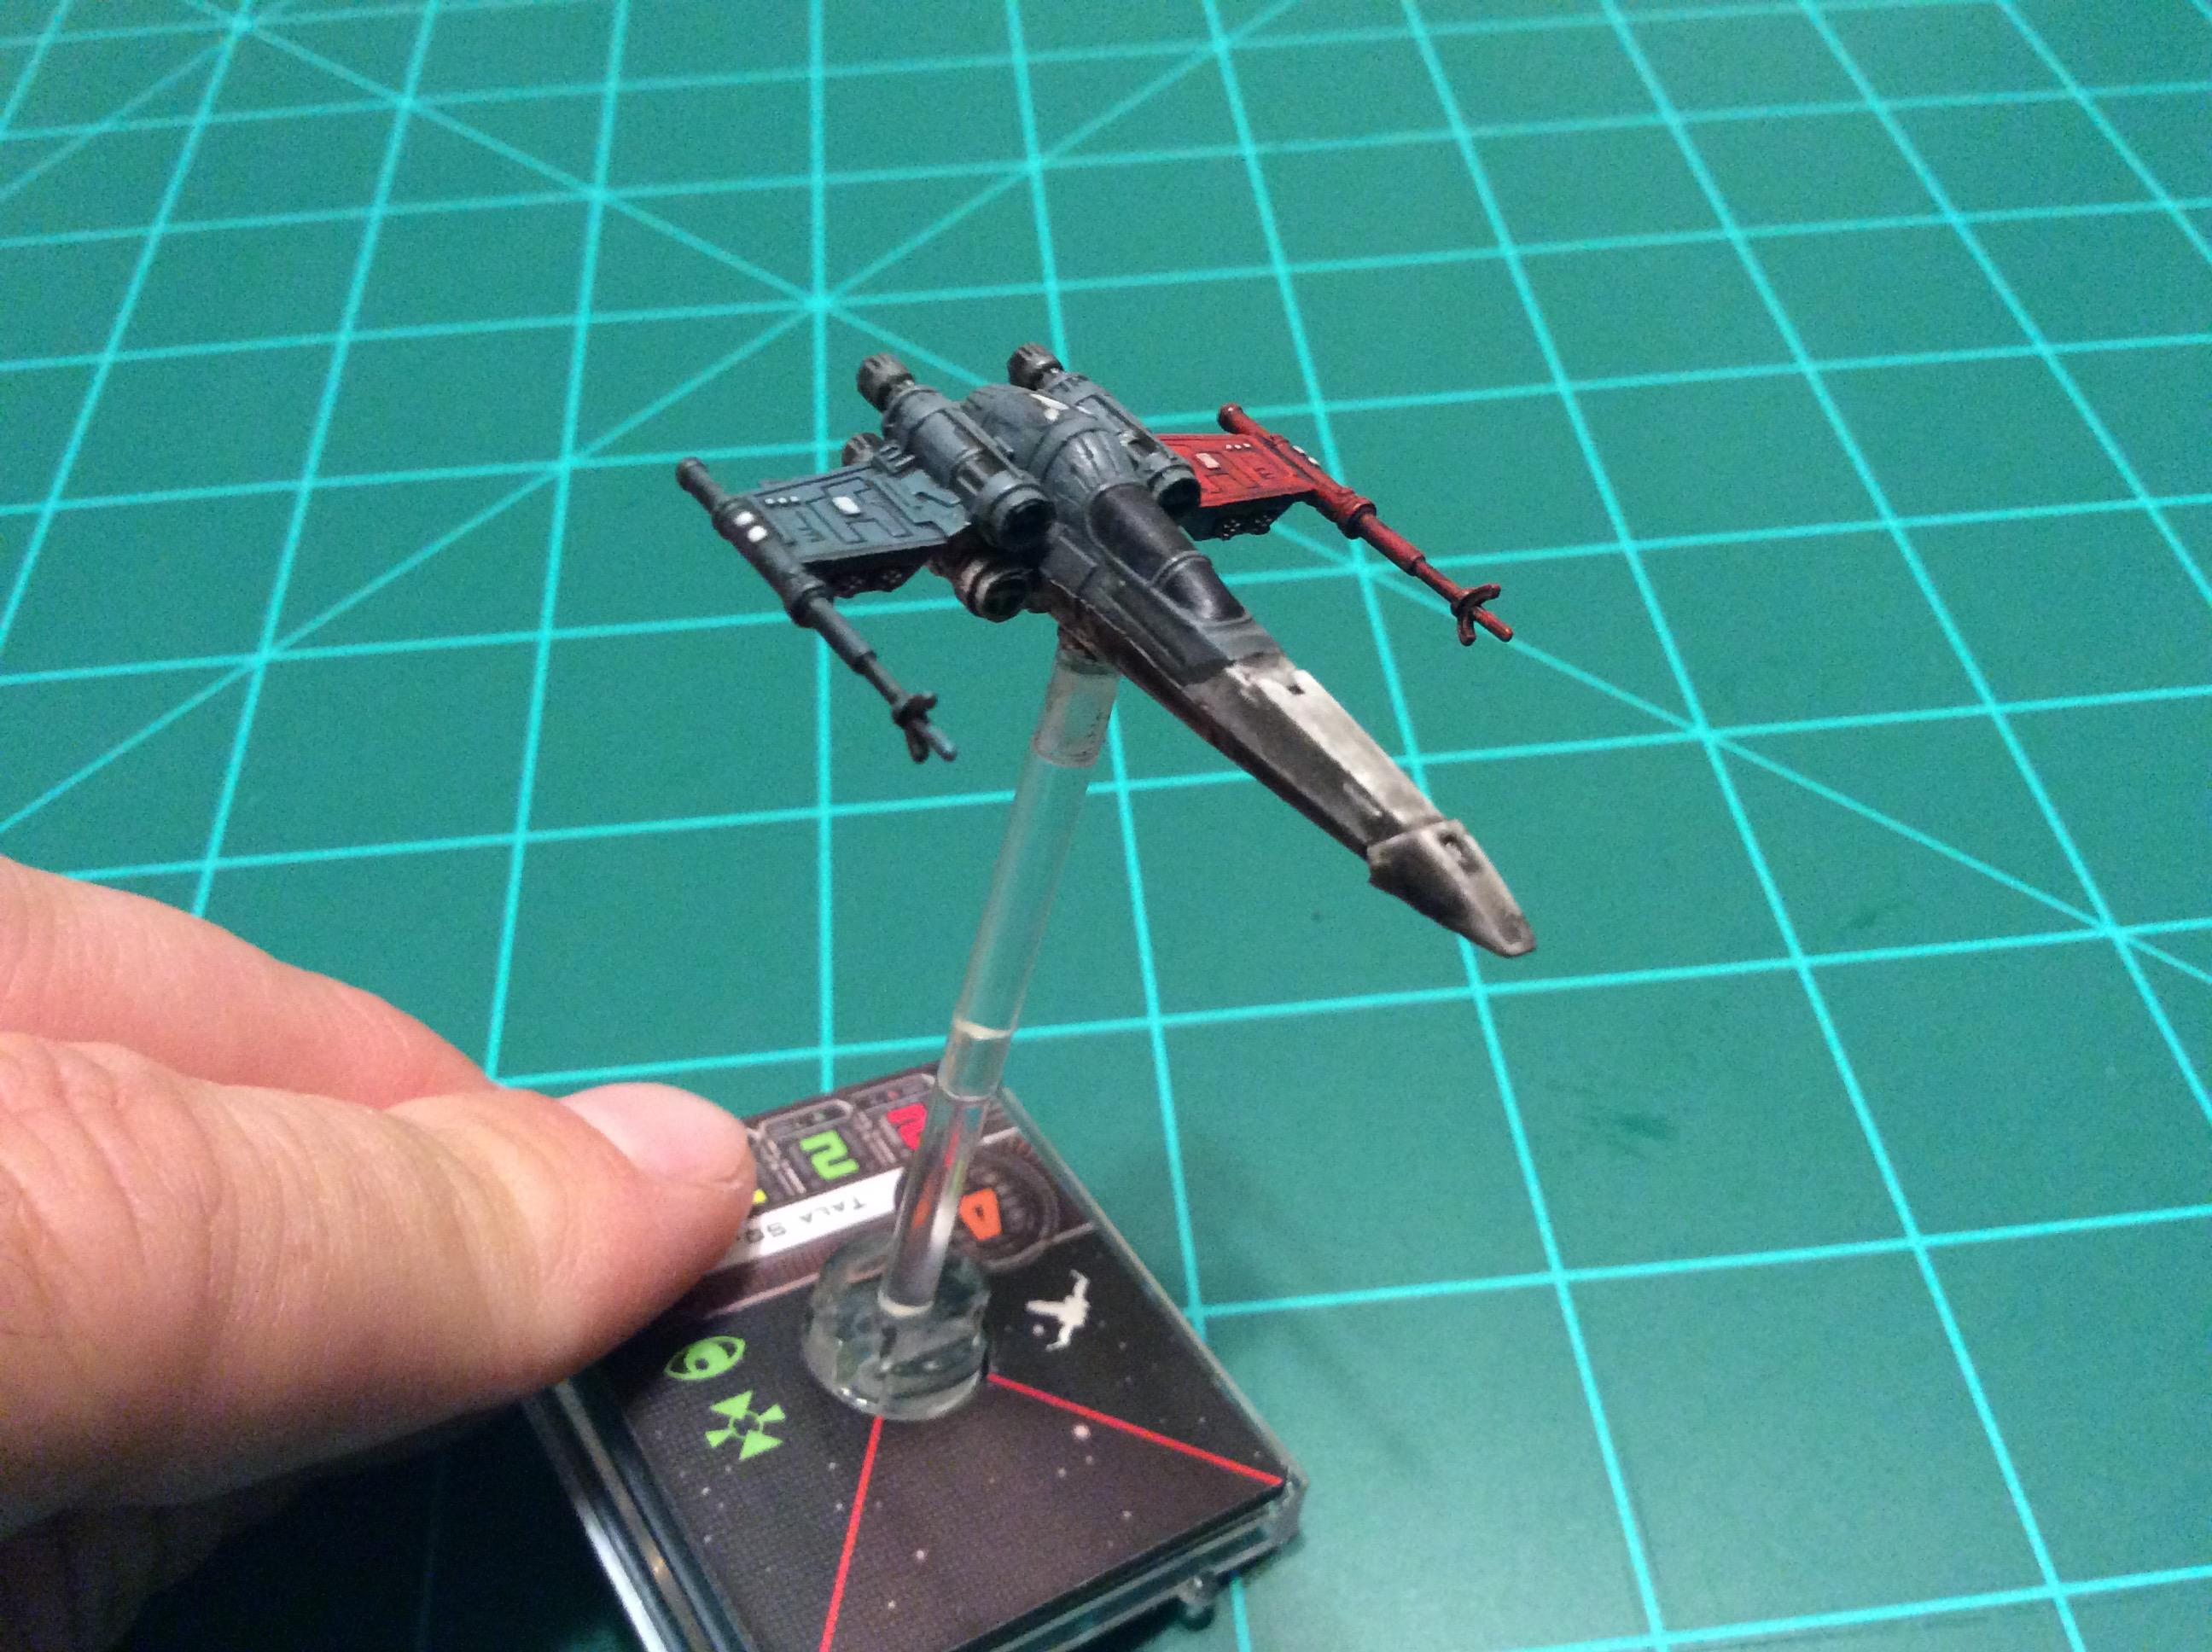 1/270 Scale, Star Wars, X-wing Miniatures Game, Z-95